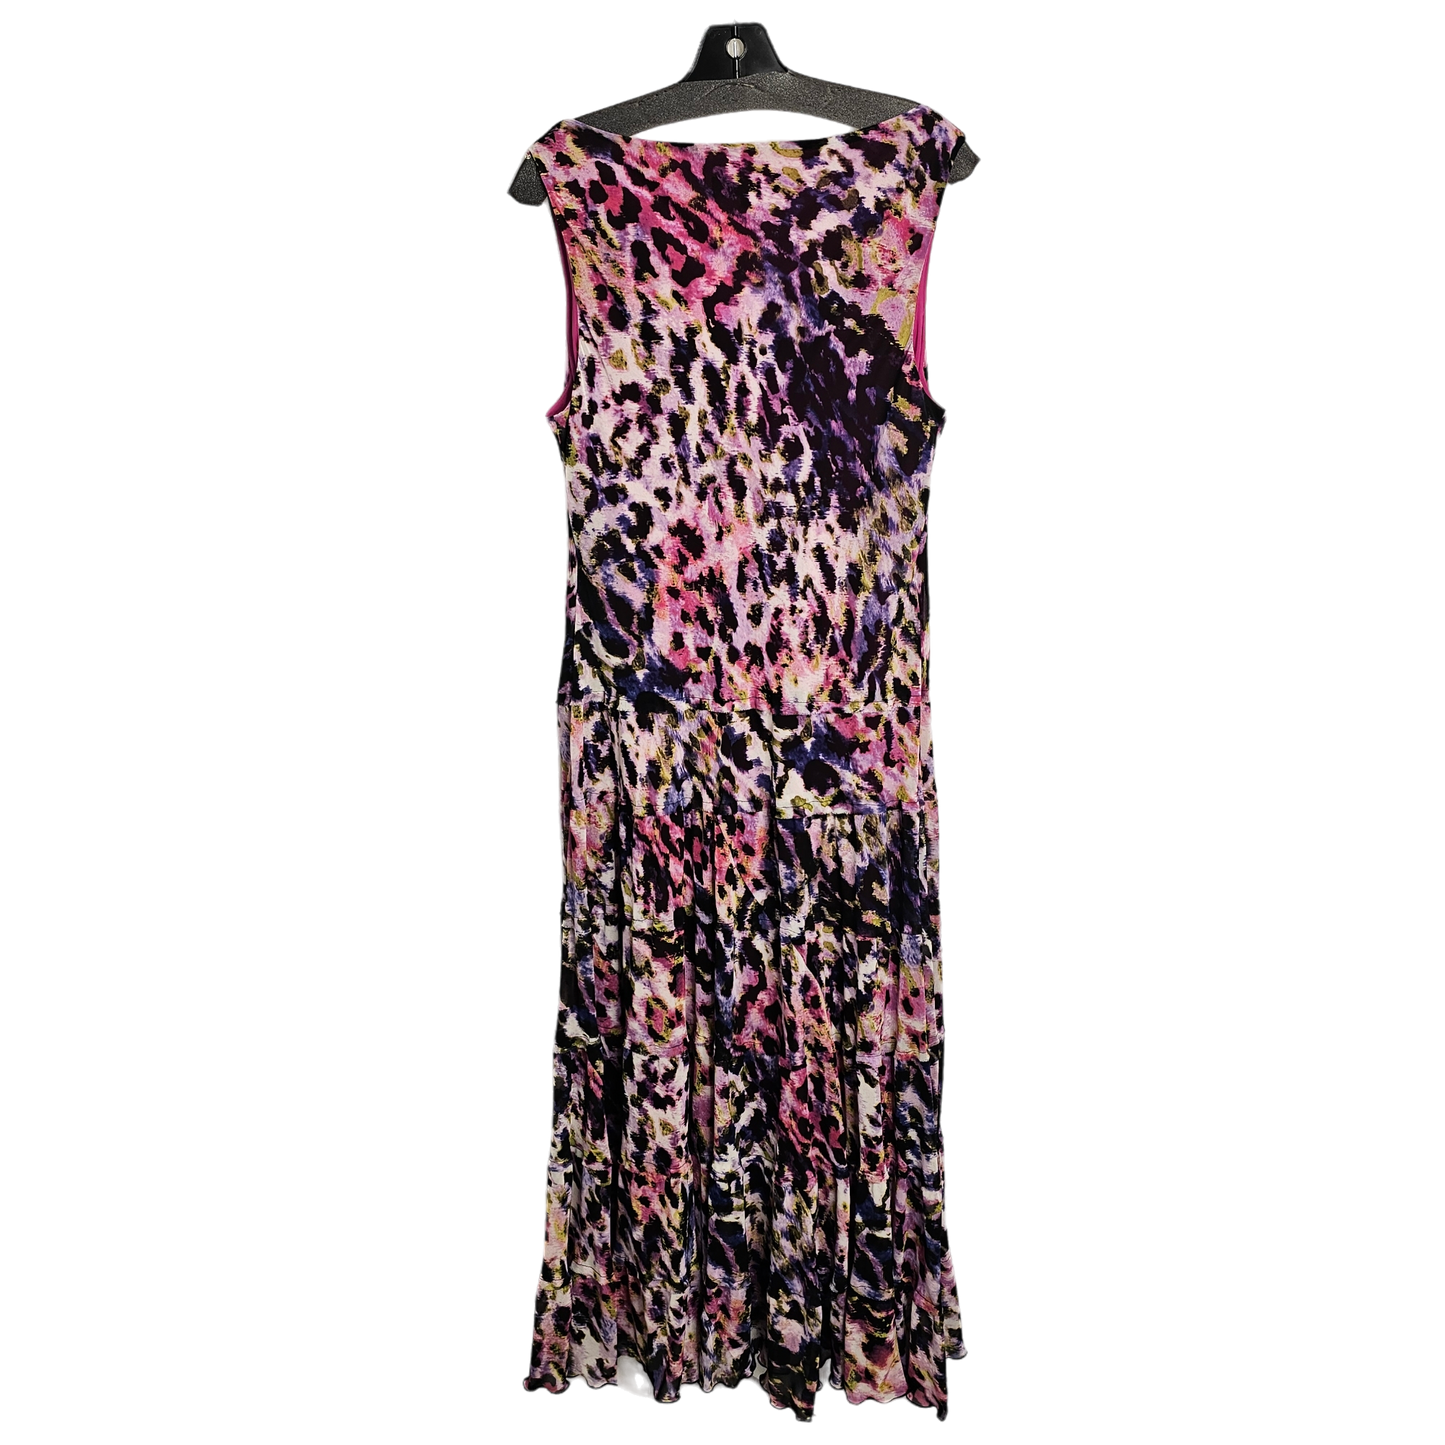 Dress Party Long By Jones New York  Size: 16